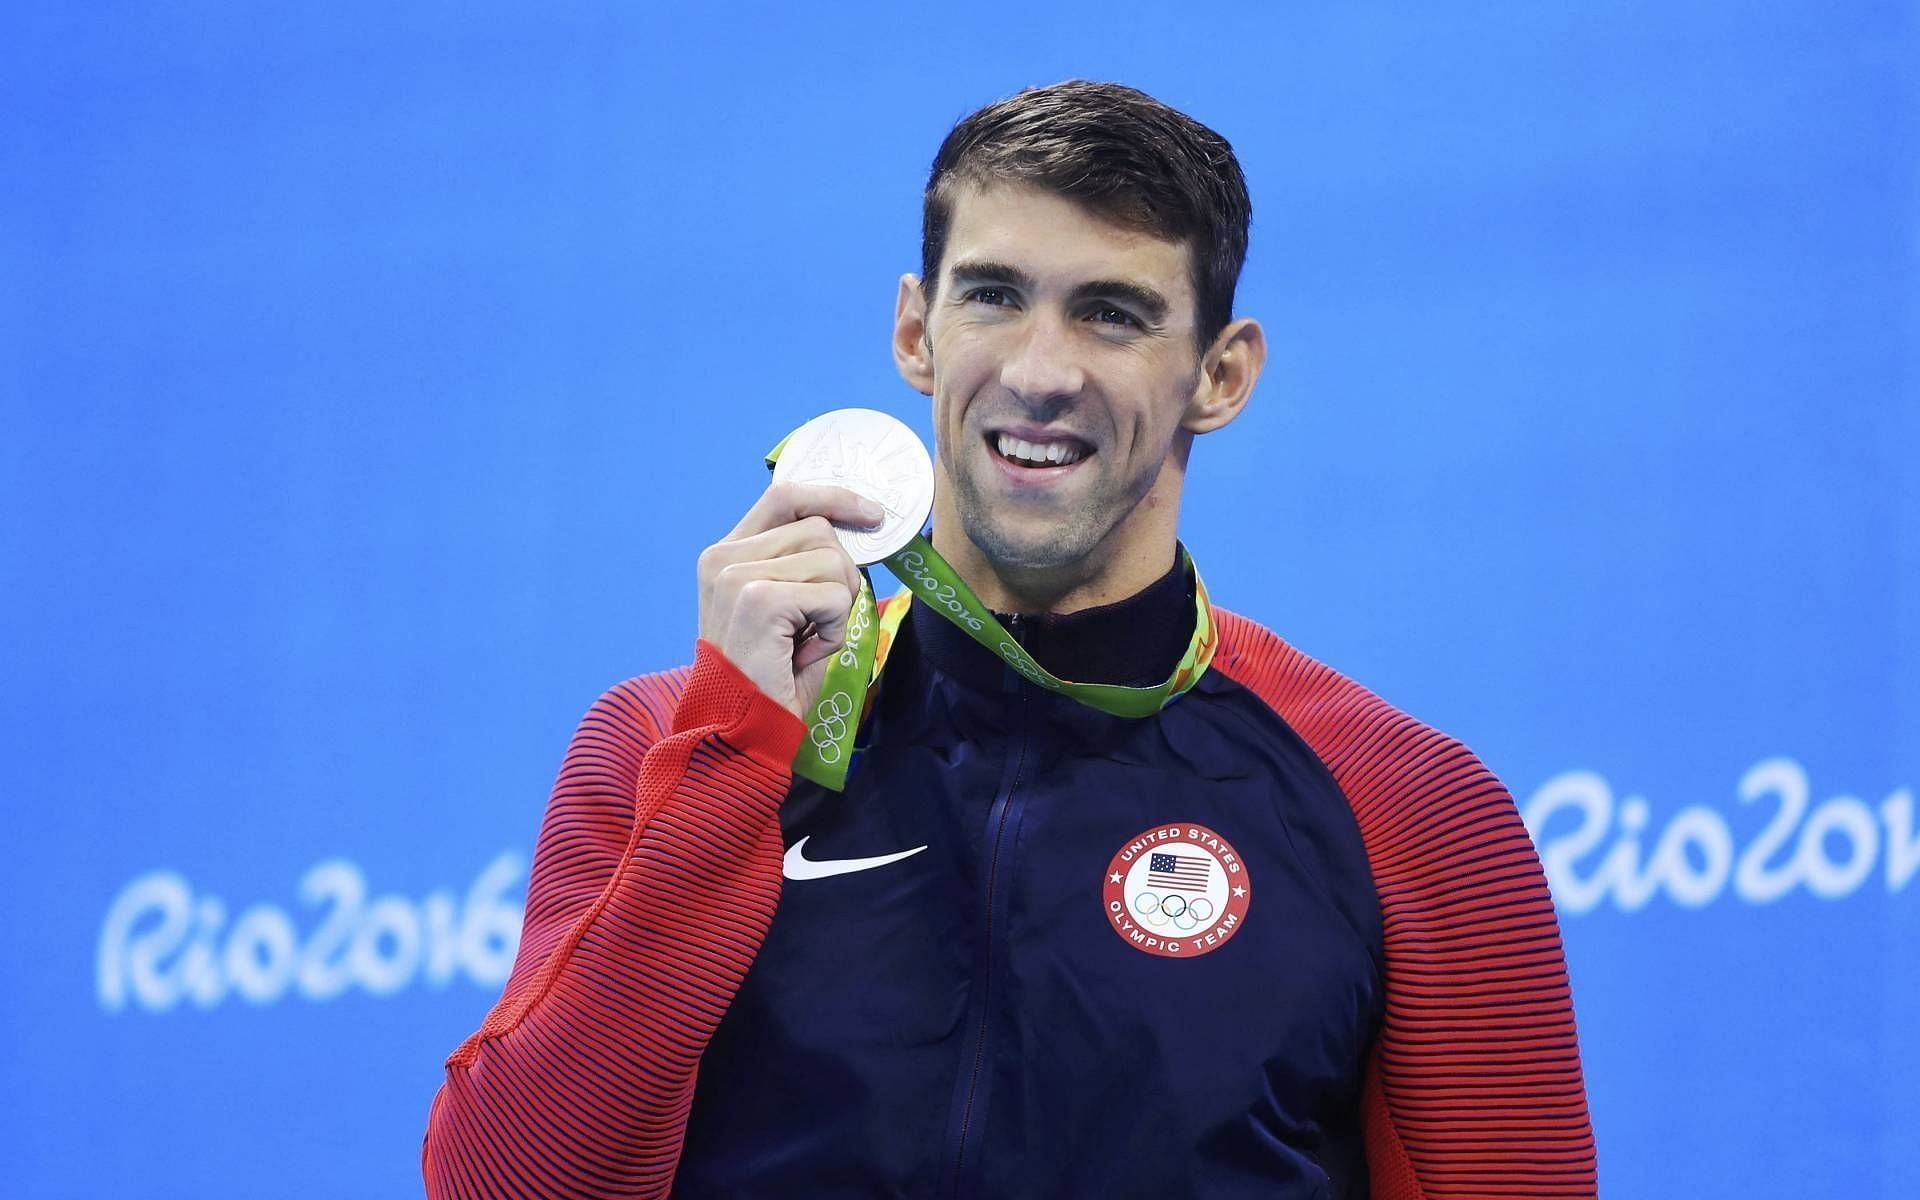 Michael Phelps with his silver medal at the 2016 Summer Olympics (Image via Olympics)